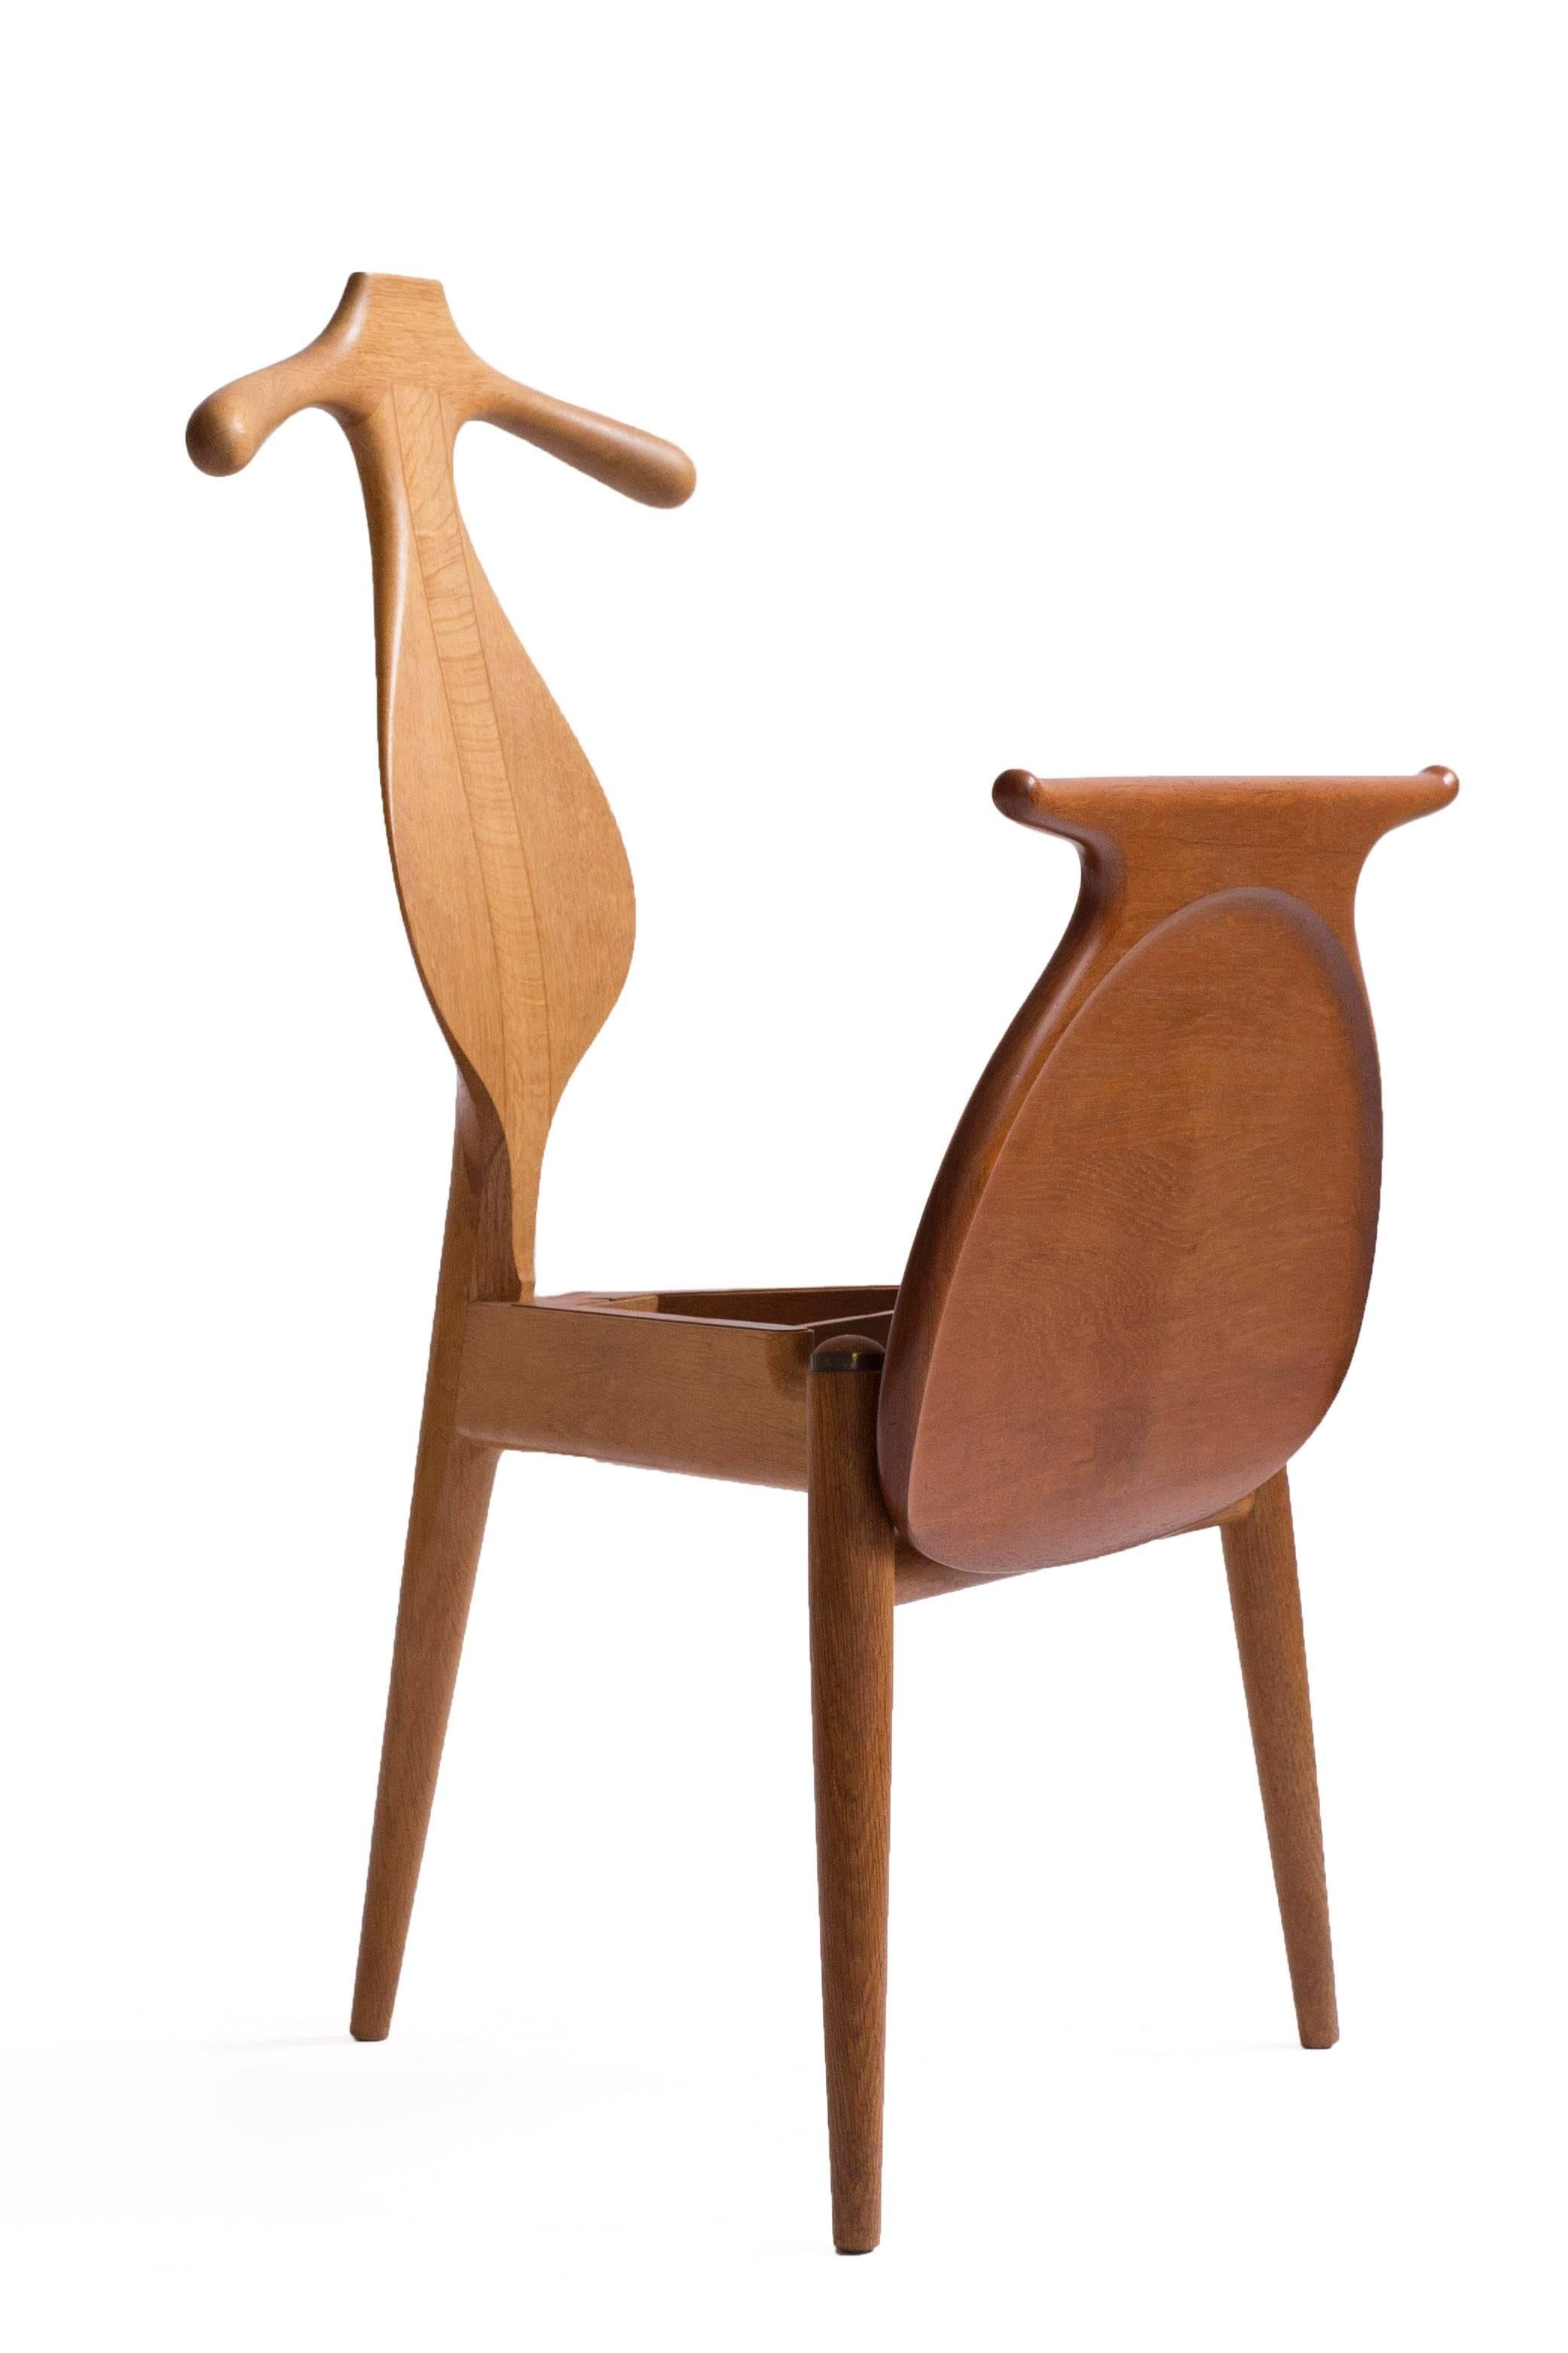 Hans J. Wegner 'Valet chair' with frame of patinated oak and seat of teak with storage space underneath. 

Designed by Hans J. Wegner 1953, executed by cabinetmaker Johannes Hansen, Denmark model JH-540. Burn-marked by maker. 

Excellent